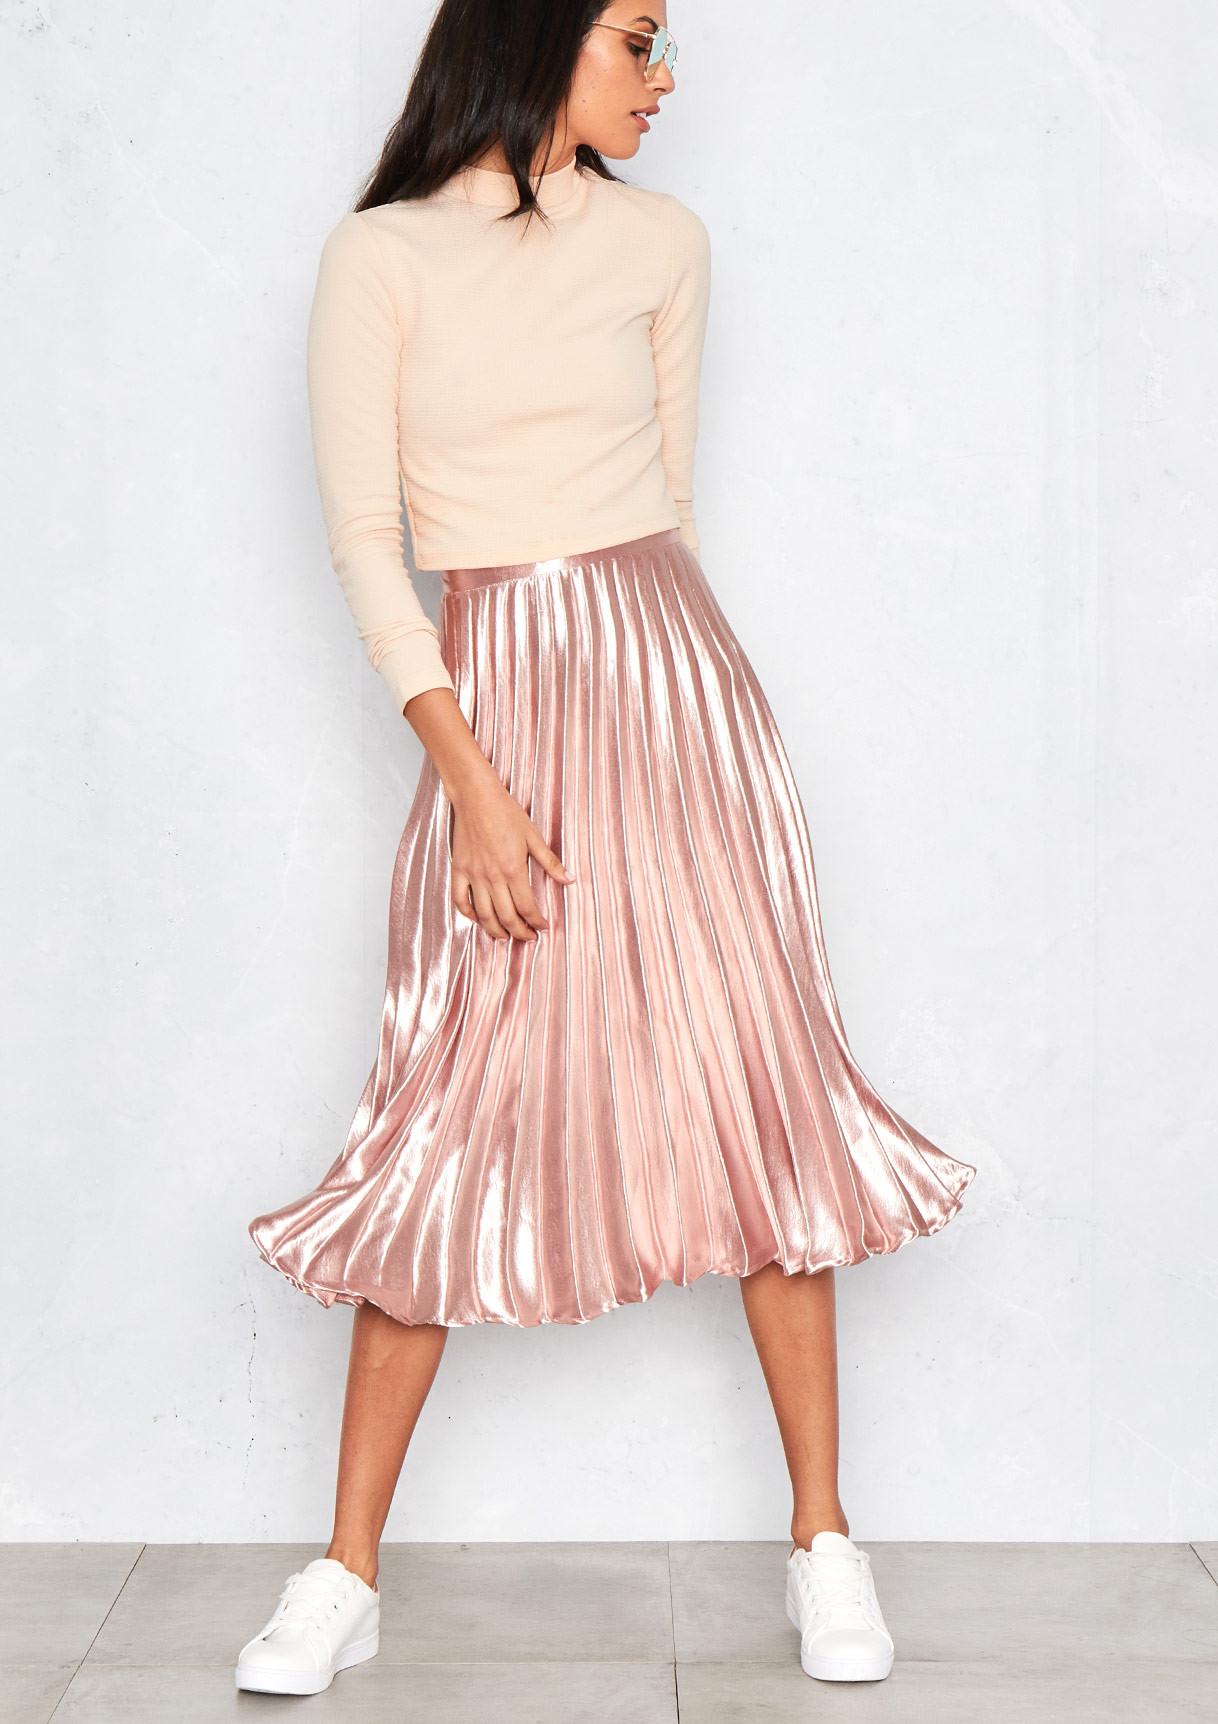 New Year's Fashion Trends: 3 Ways To Style A Pleated Skirt This New ...